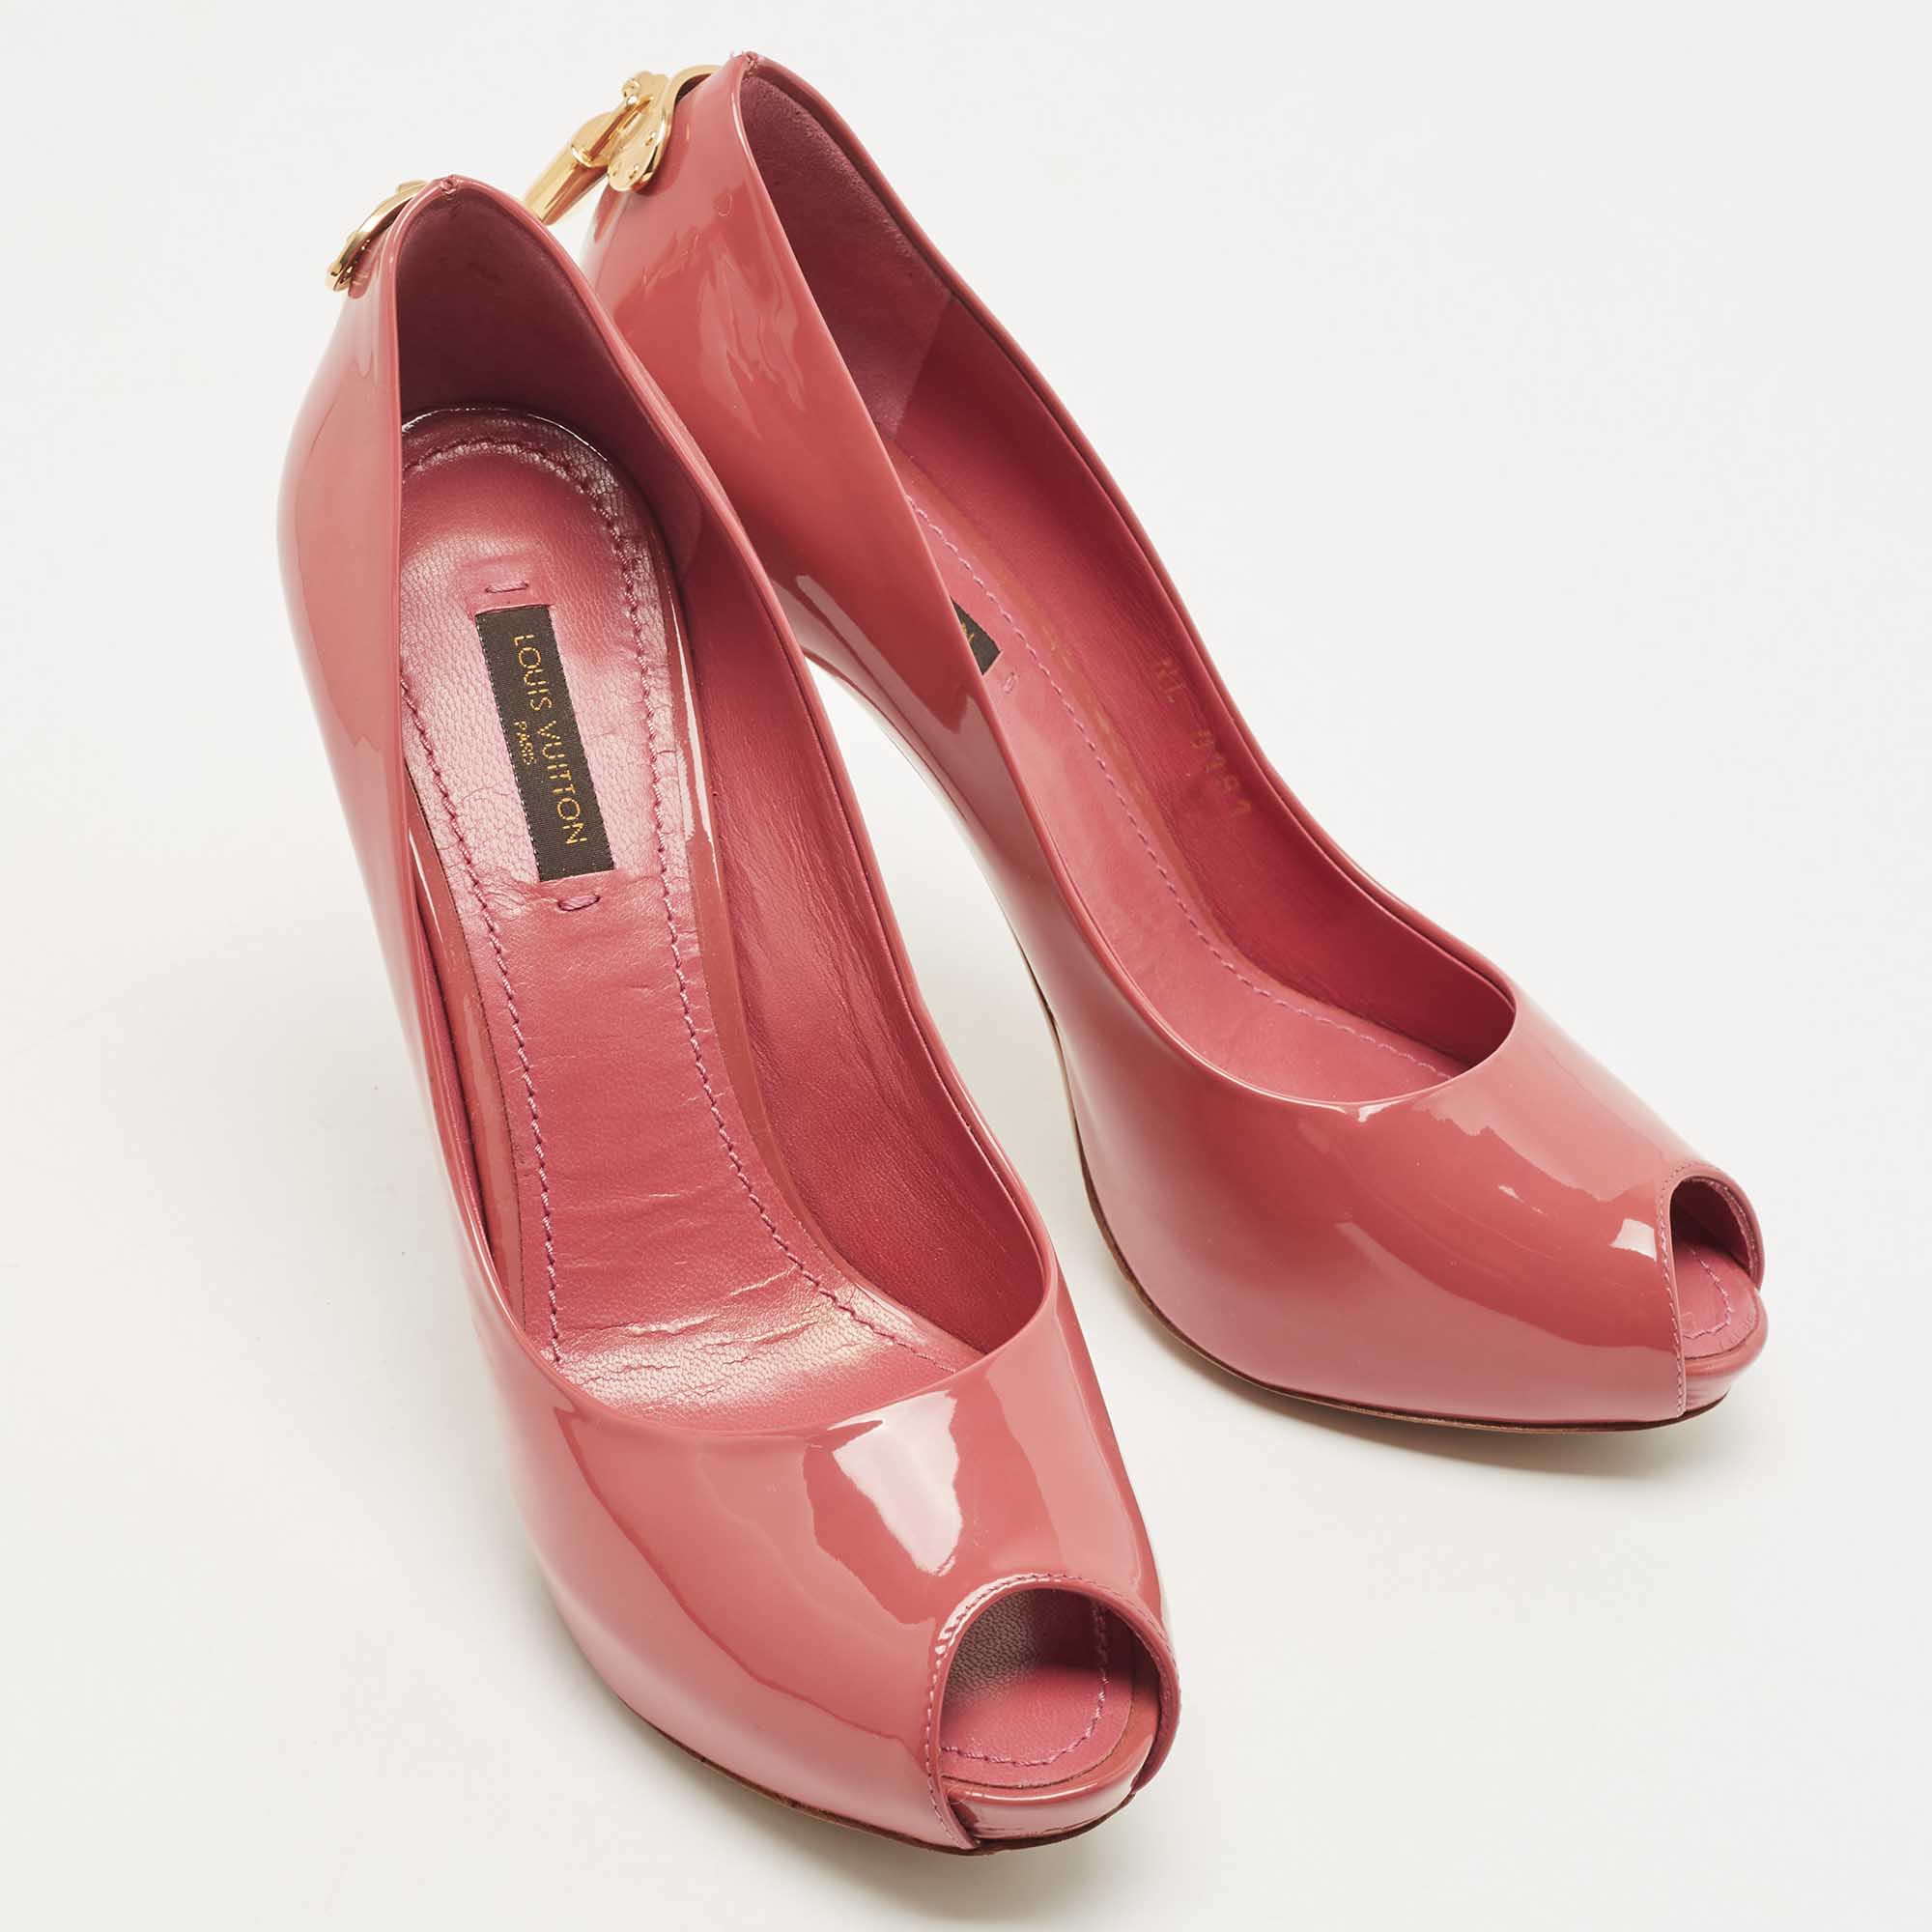 Louis Vuitton Red Patent Leather Oh Really! Pumps Size 36.5